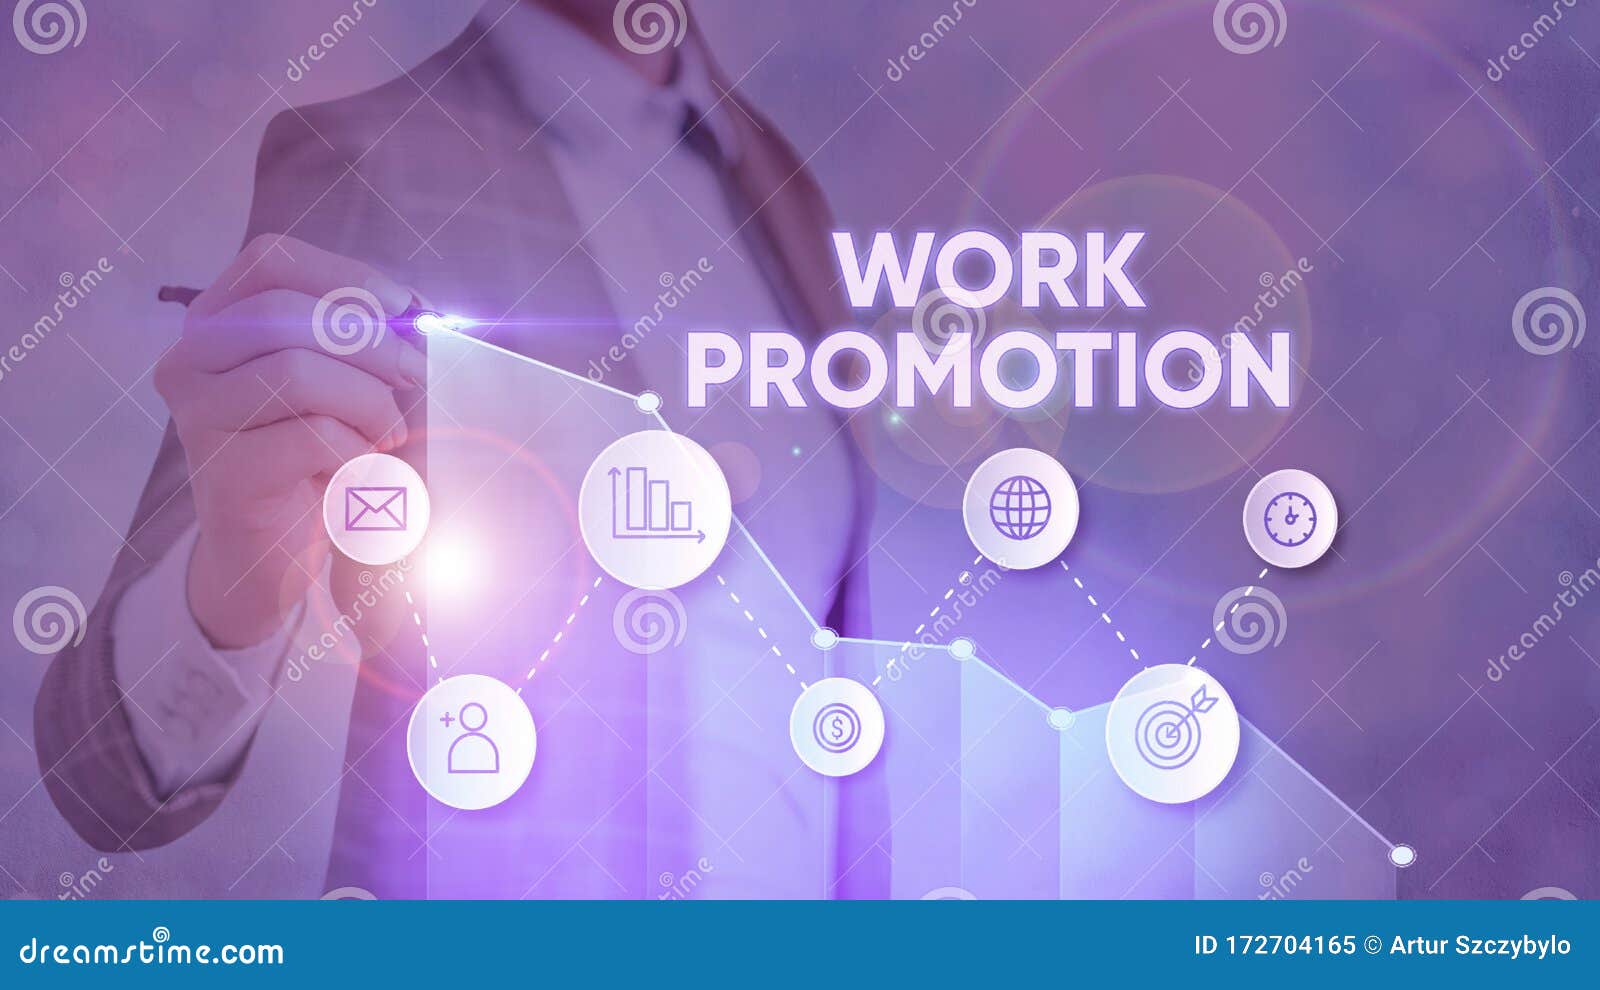 Promotions work. No promotion at work.